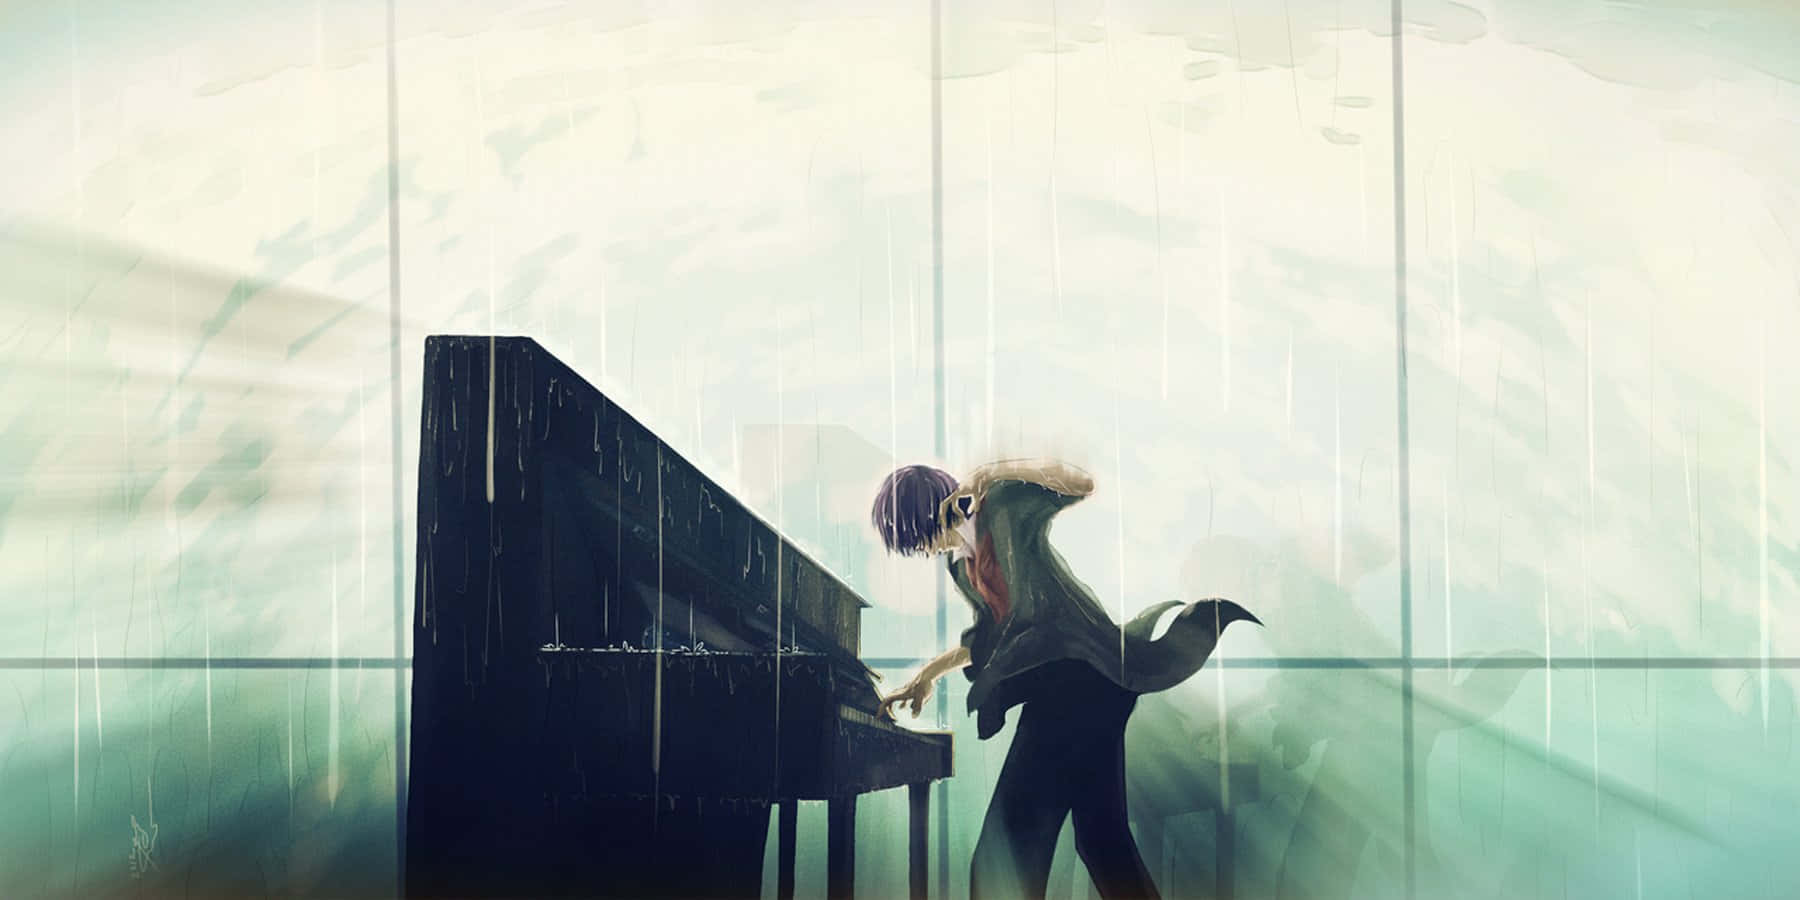 FDSHF Anime Girl Playing Piano Poster Decorative Painting Canvas Wall Art  Living Room Poster Bedroom Painting 30x45cm : Amazon.de: Home & Kitchen